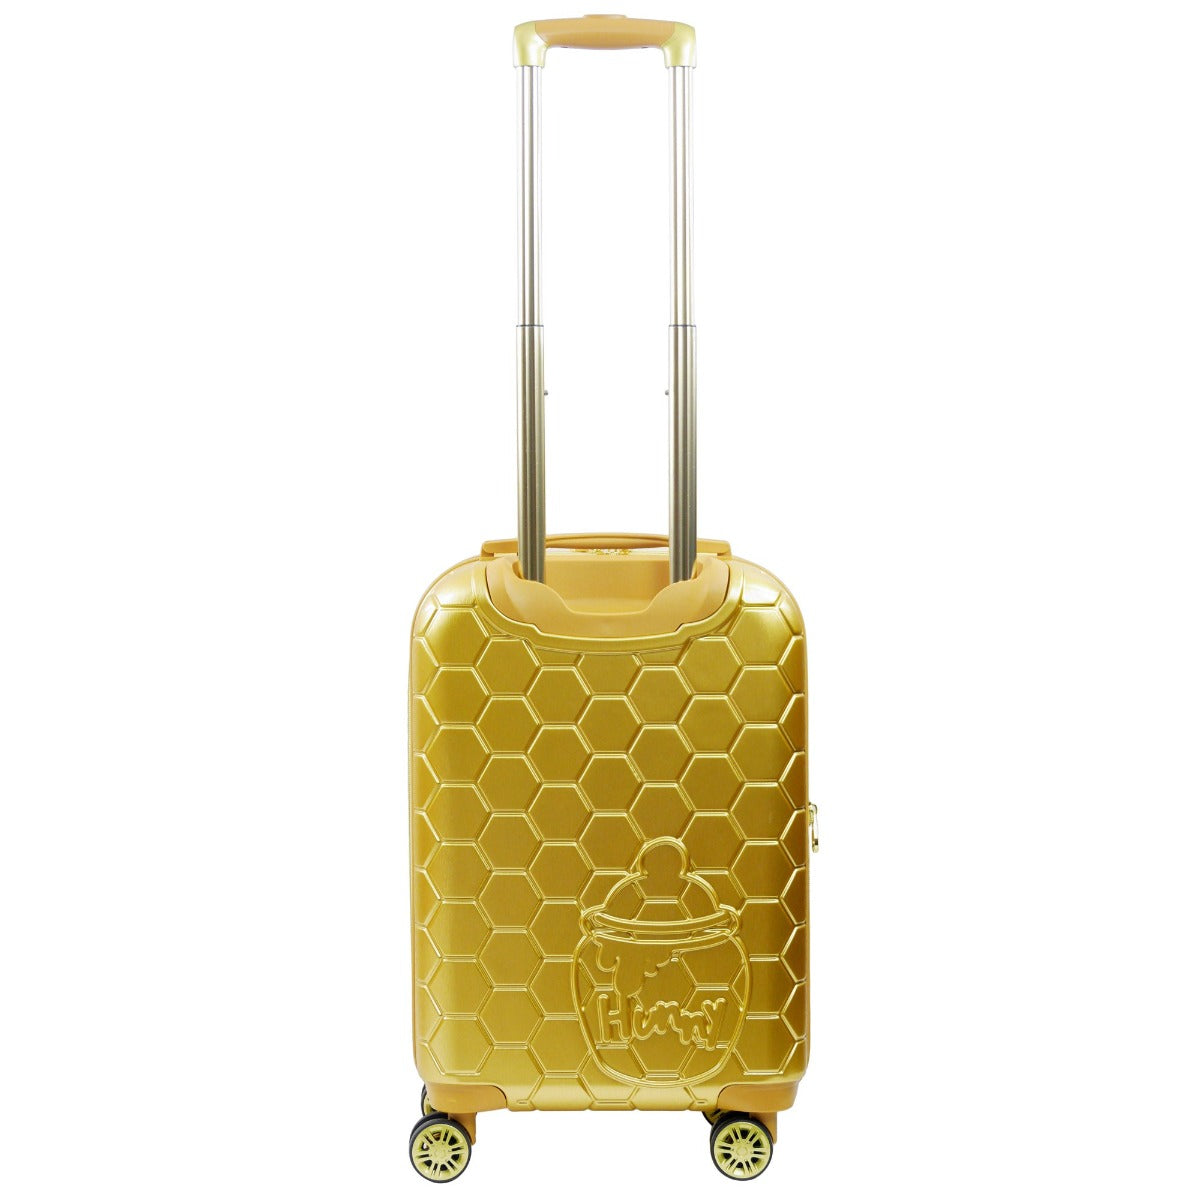 Gold Disney Winnie the Pooh 22.5" hardside spinner carry on luggage - best hard shell suitcase for traveling